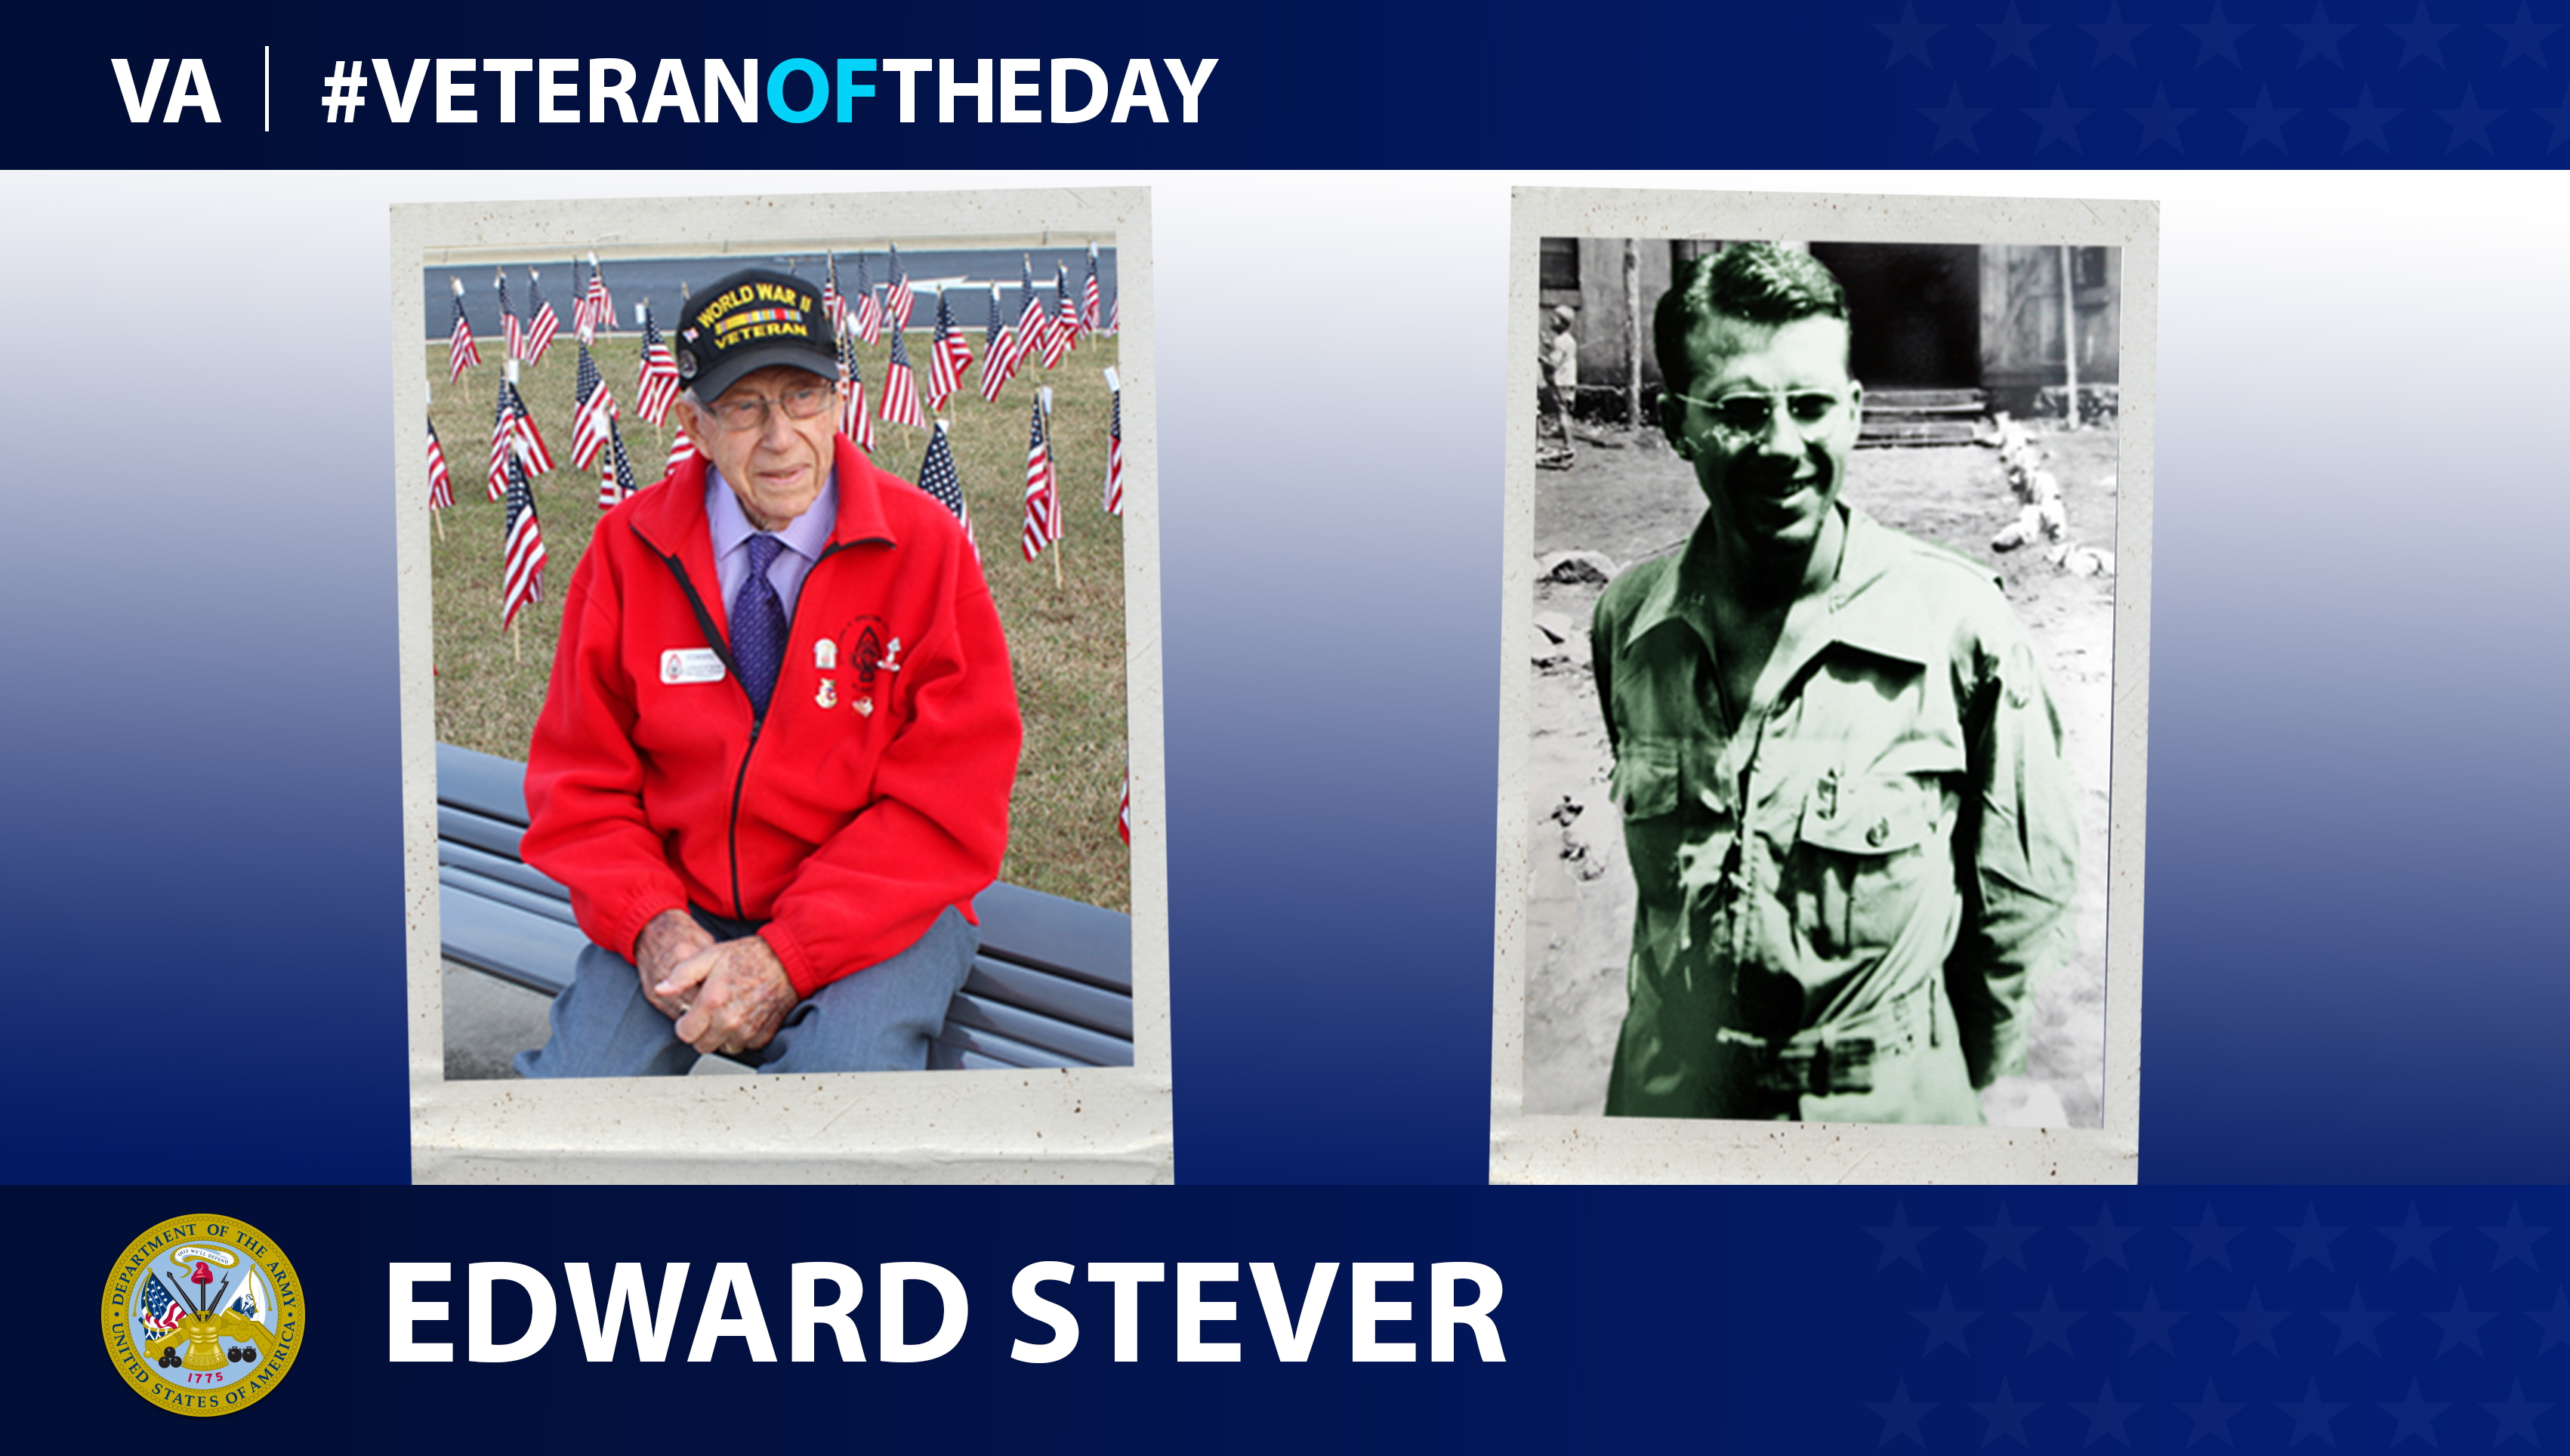 Army Air Corps Veteran Edward Stever is today's Veteran of the Day.